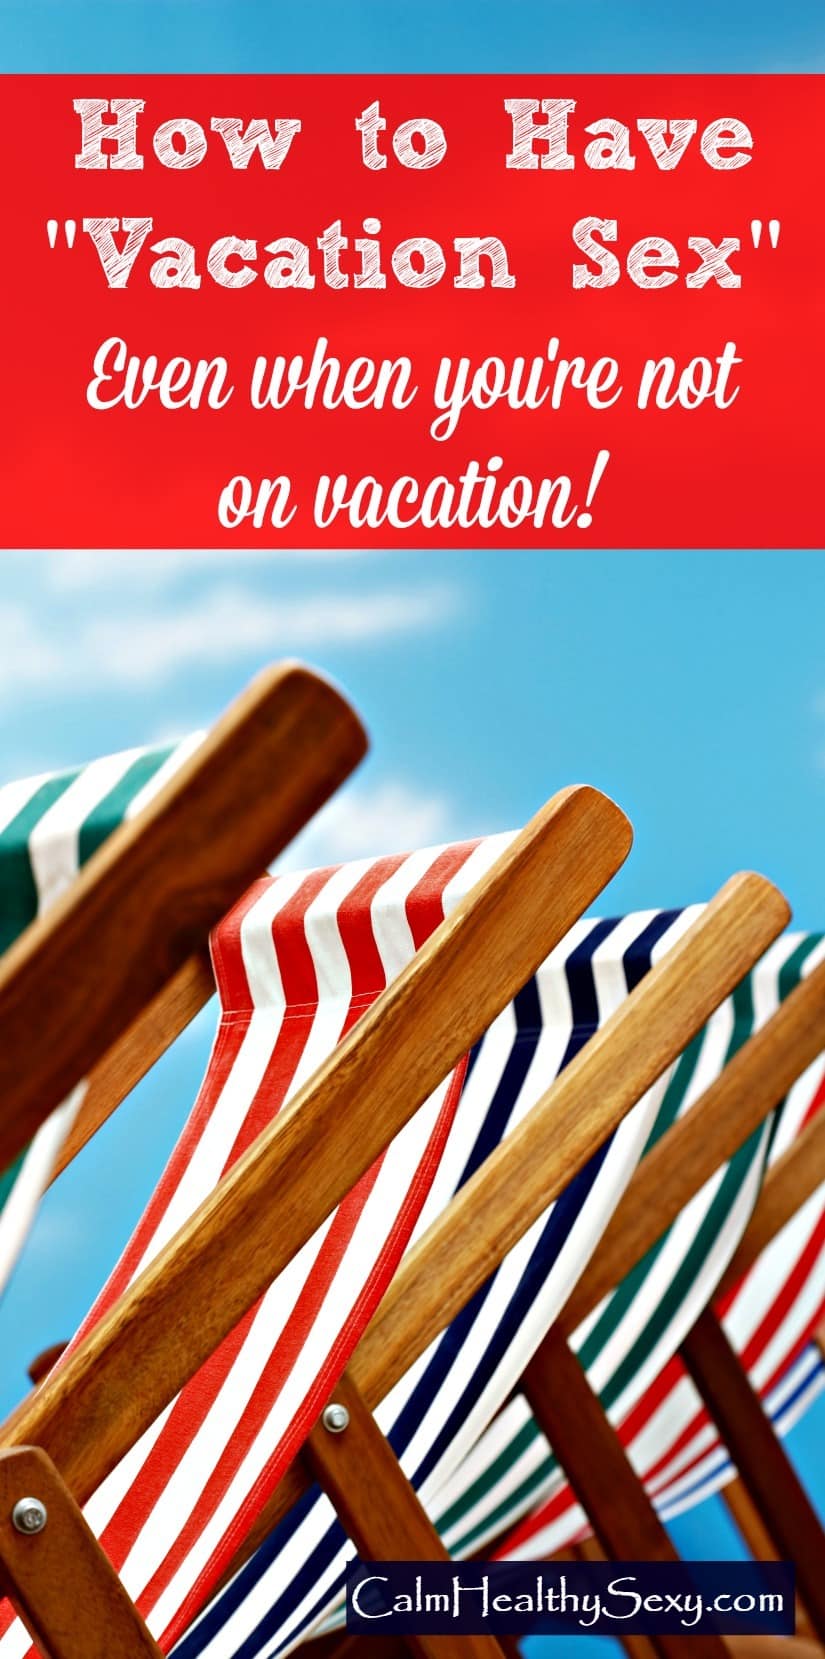 How to have vacation sex - even when you're not on vacation! It's often easier to relax and enjoy sex on vacation, but what about the rest of the year? Here are 4 simple things wives and moms can do to enjoy vacation sex throughout the year. Marriage tips, advice and encouragement | Christian marriage